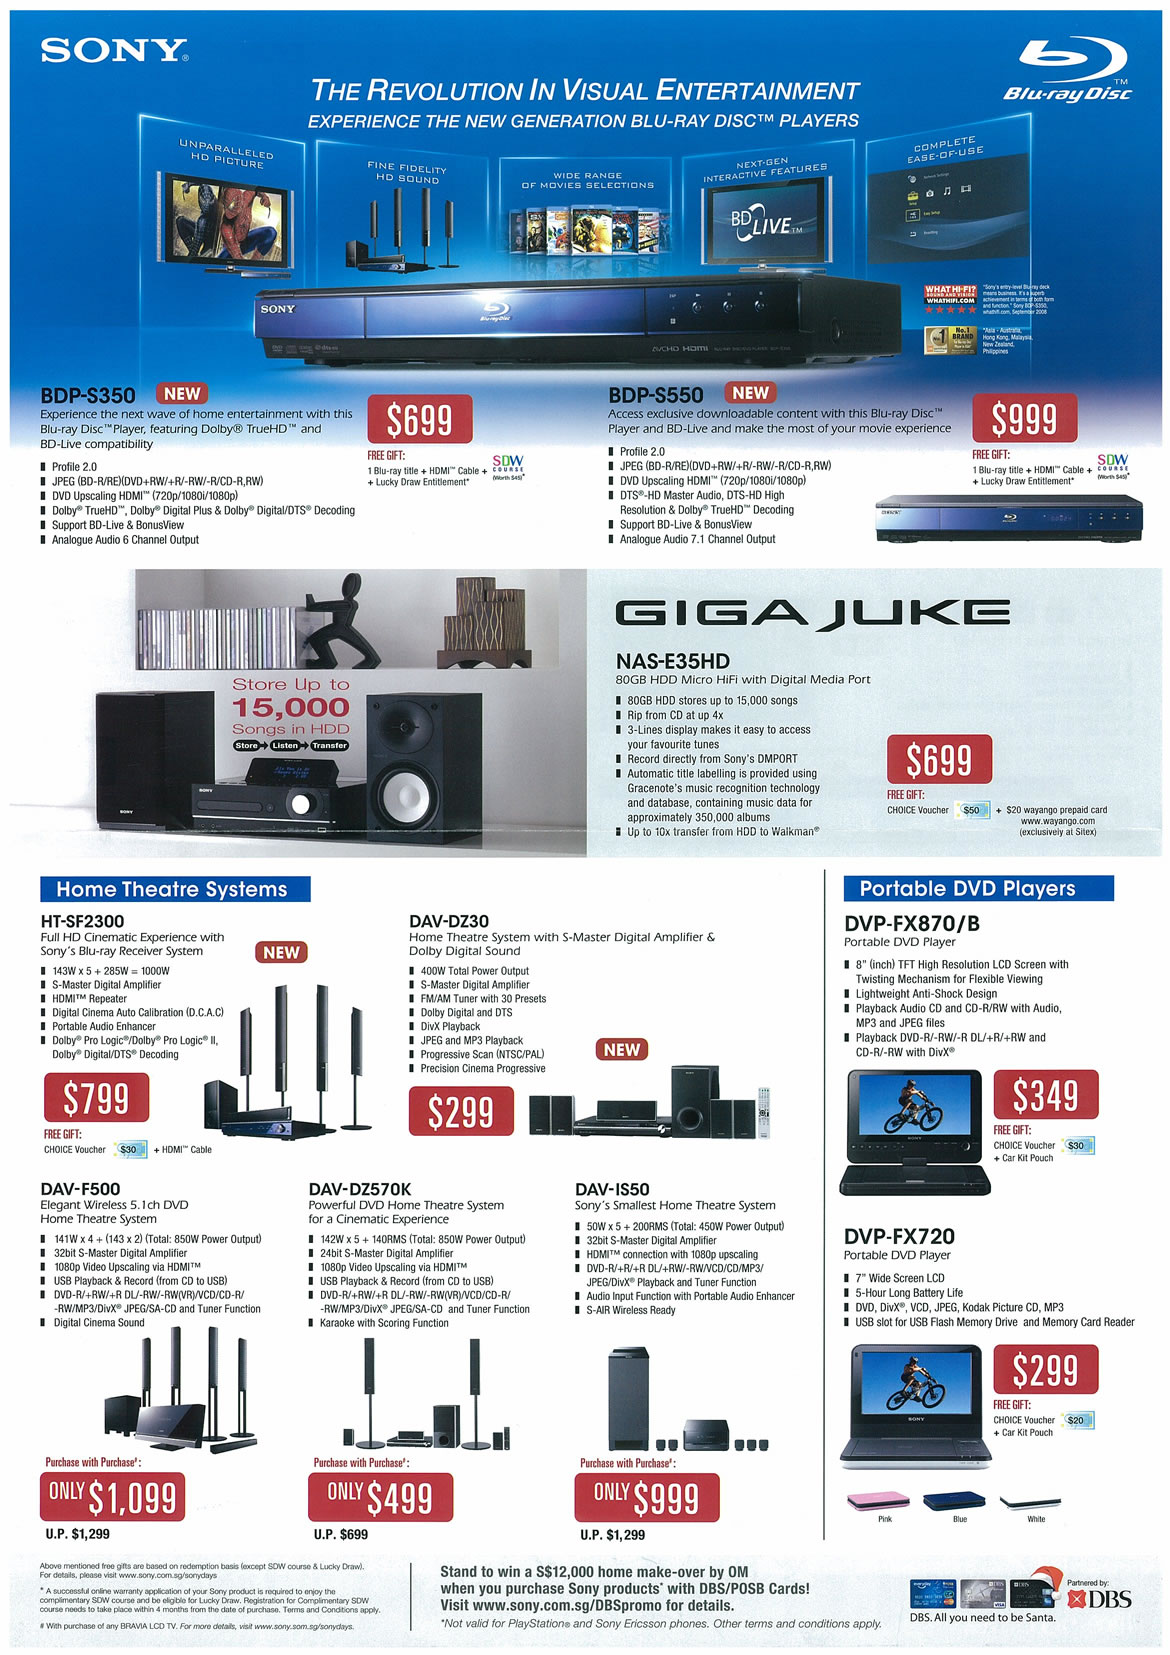 Sitex 2008 price list image brochure of Sony LCD TVs Page 2 - Vr-zone Tclong